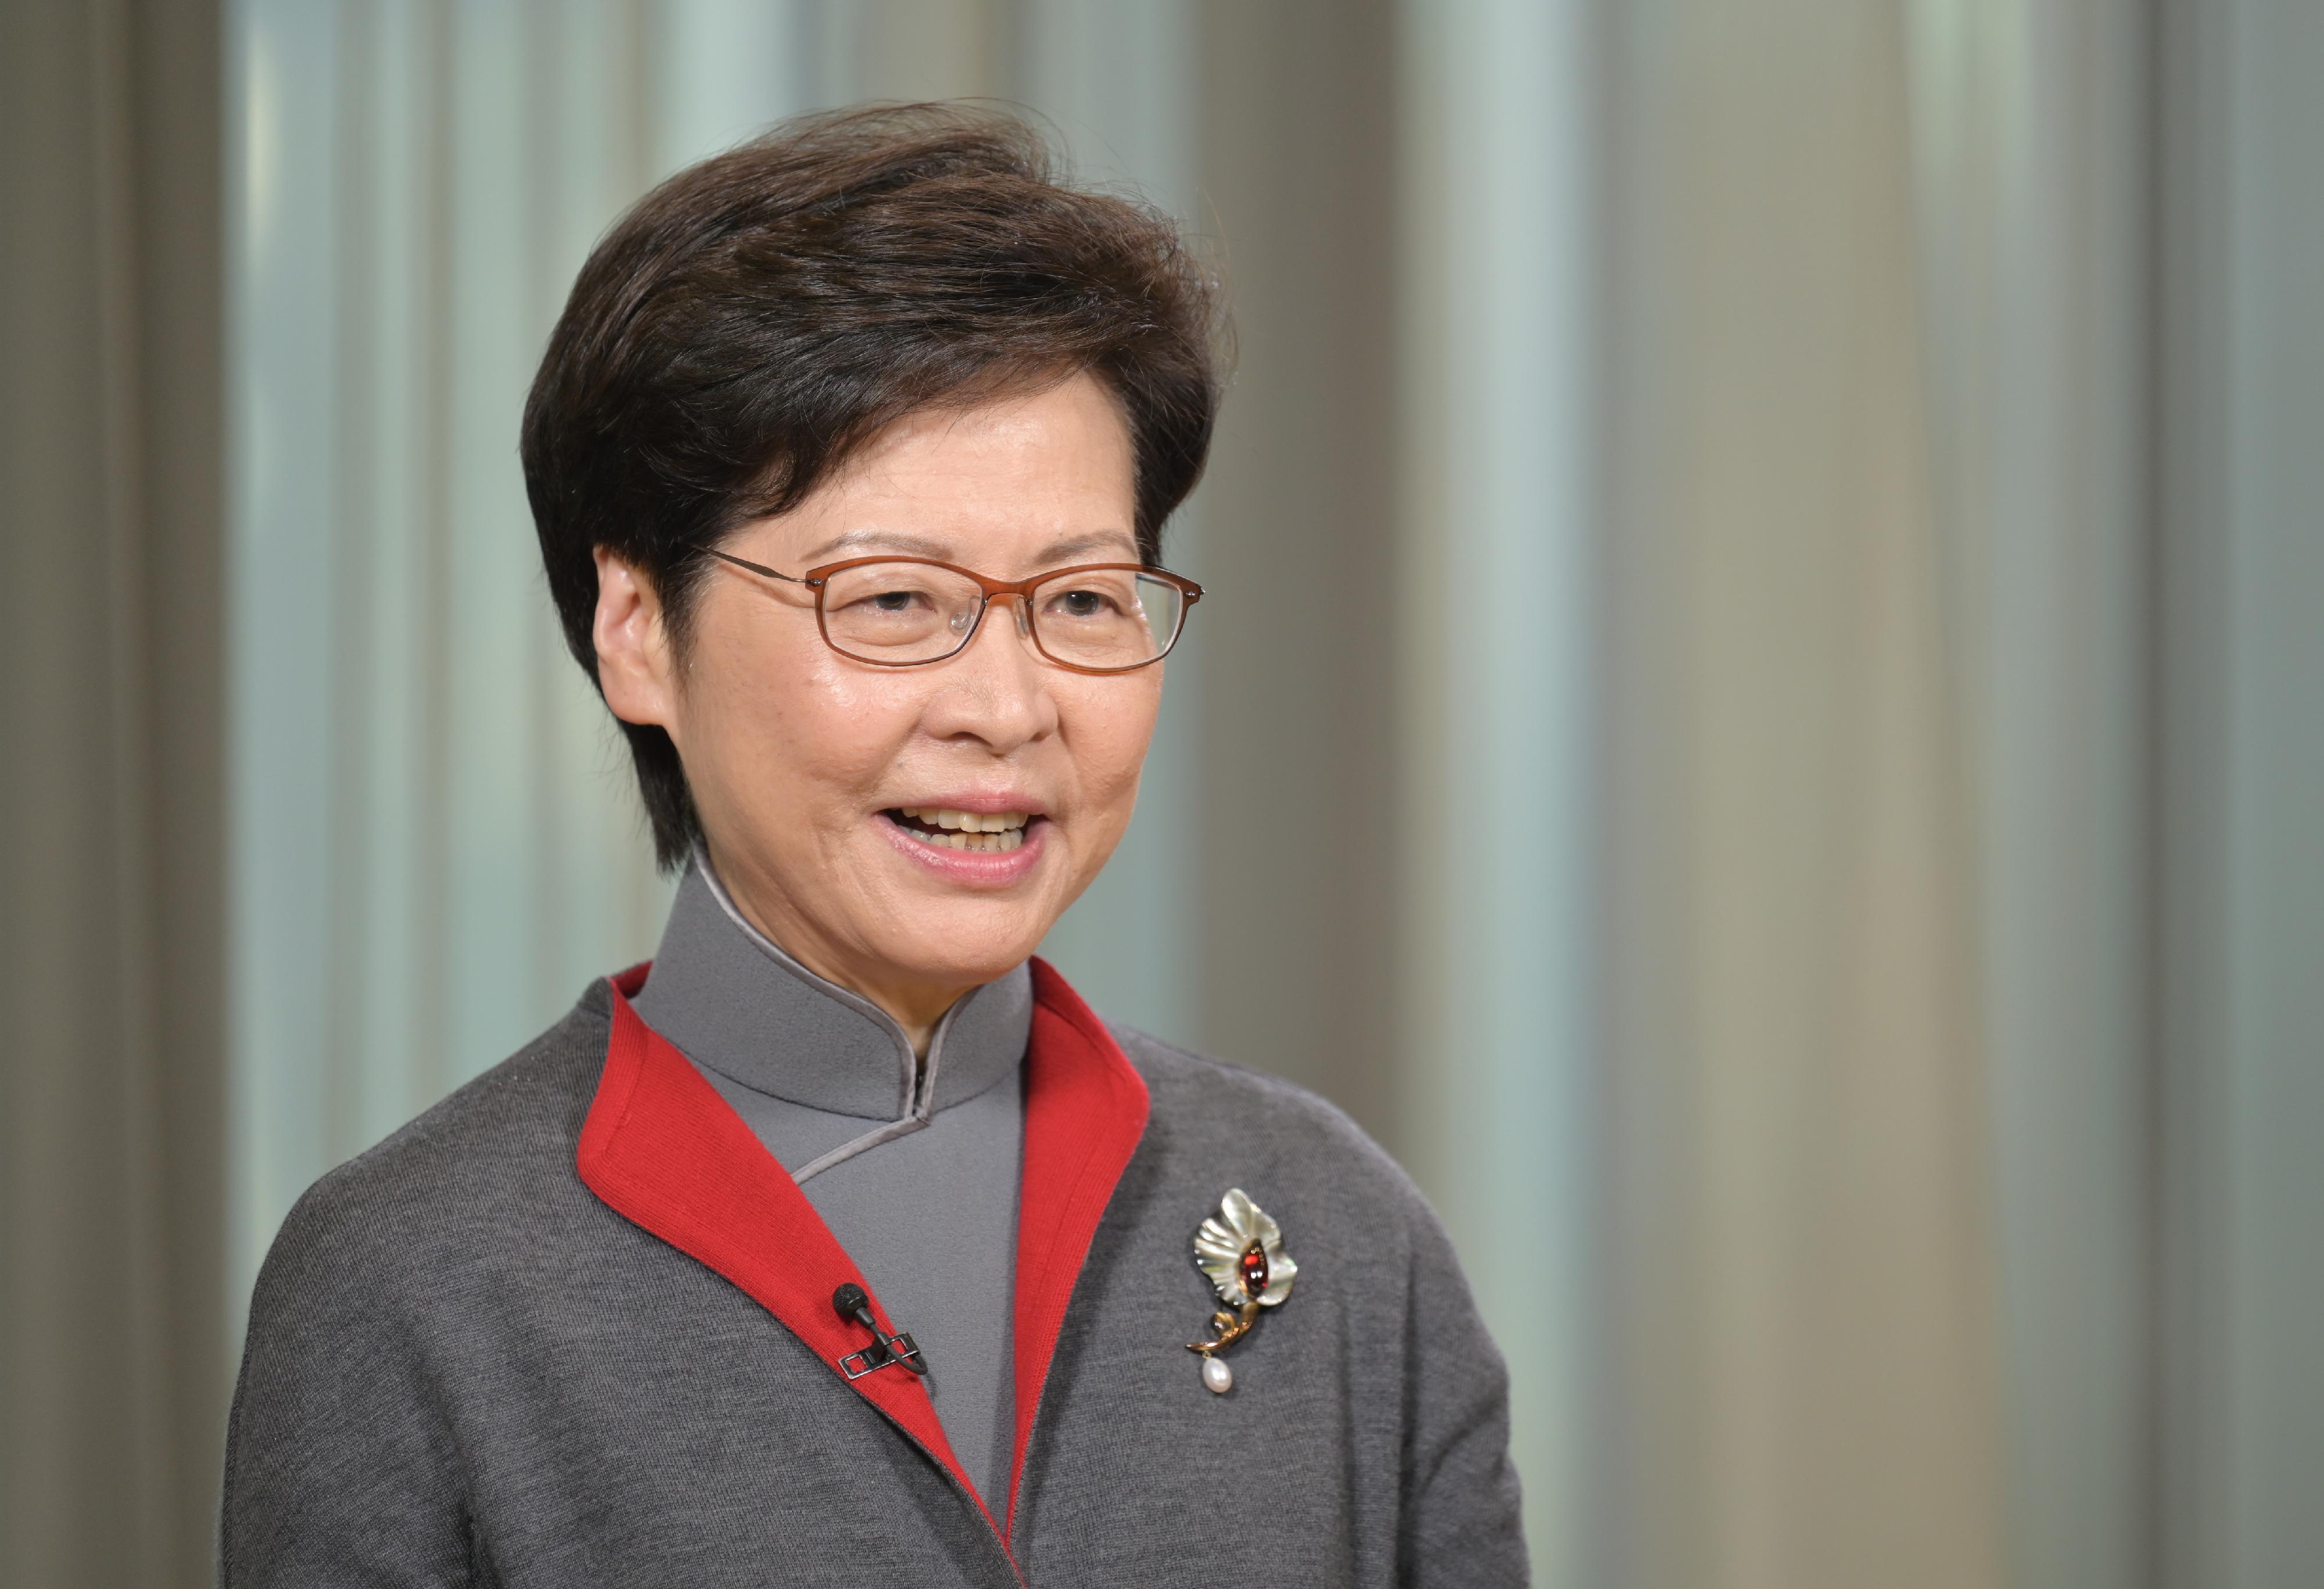 The Chief Executive, Mrs Carrie Lam, delivers a video speech at the Opening Session of the Business of Intellectual Property Asia Forum today (December 2).